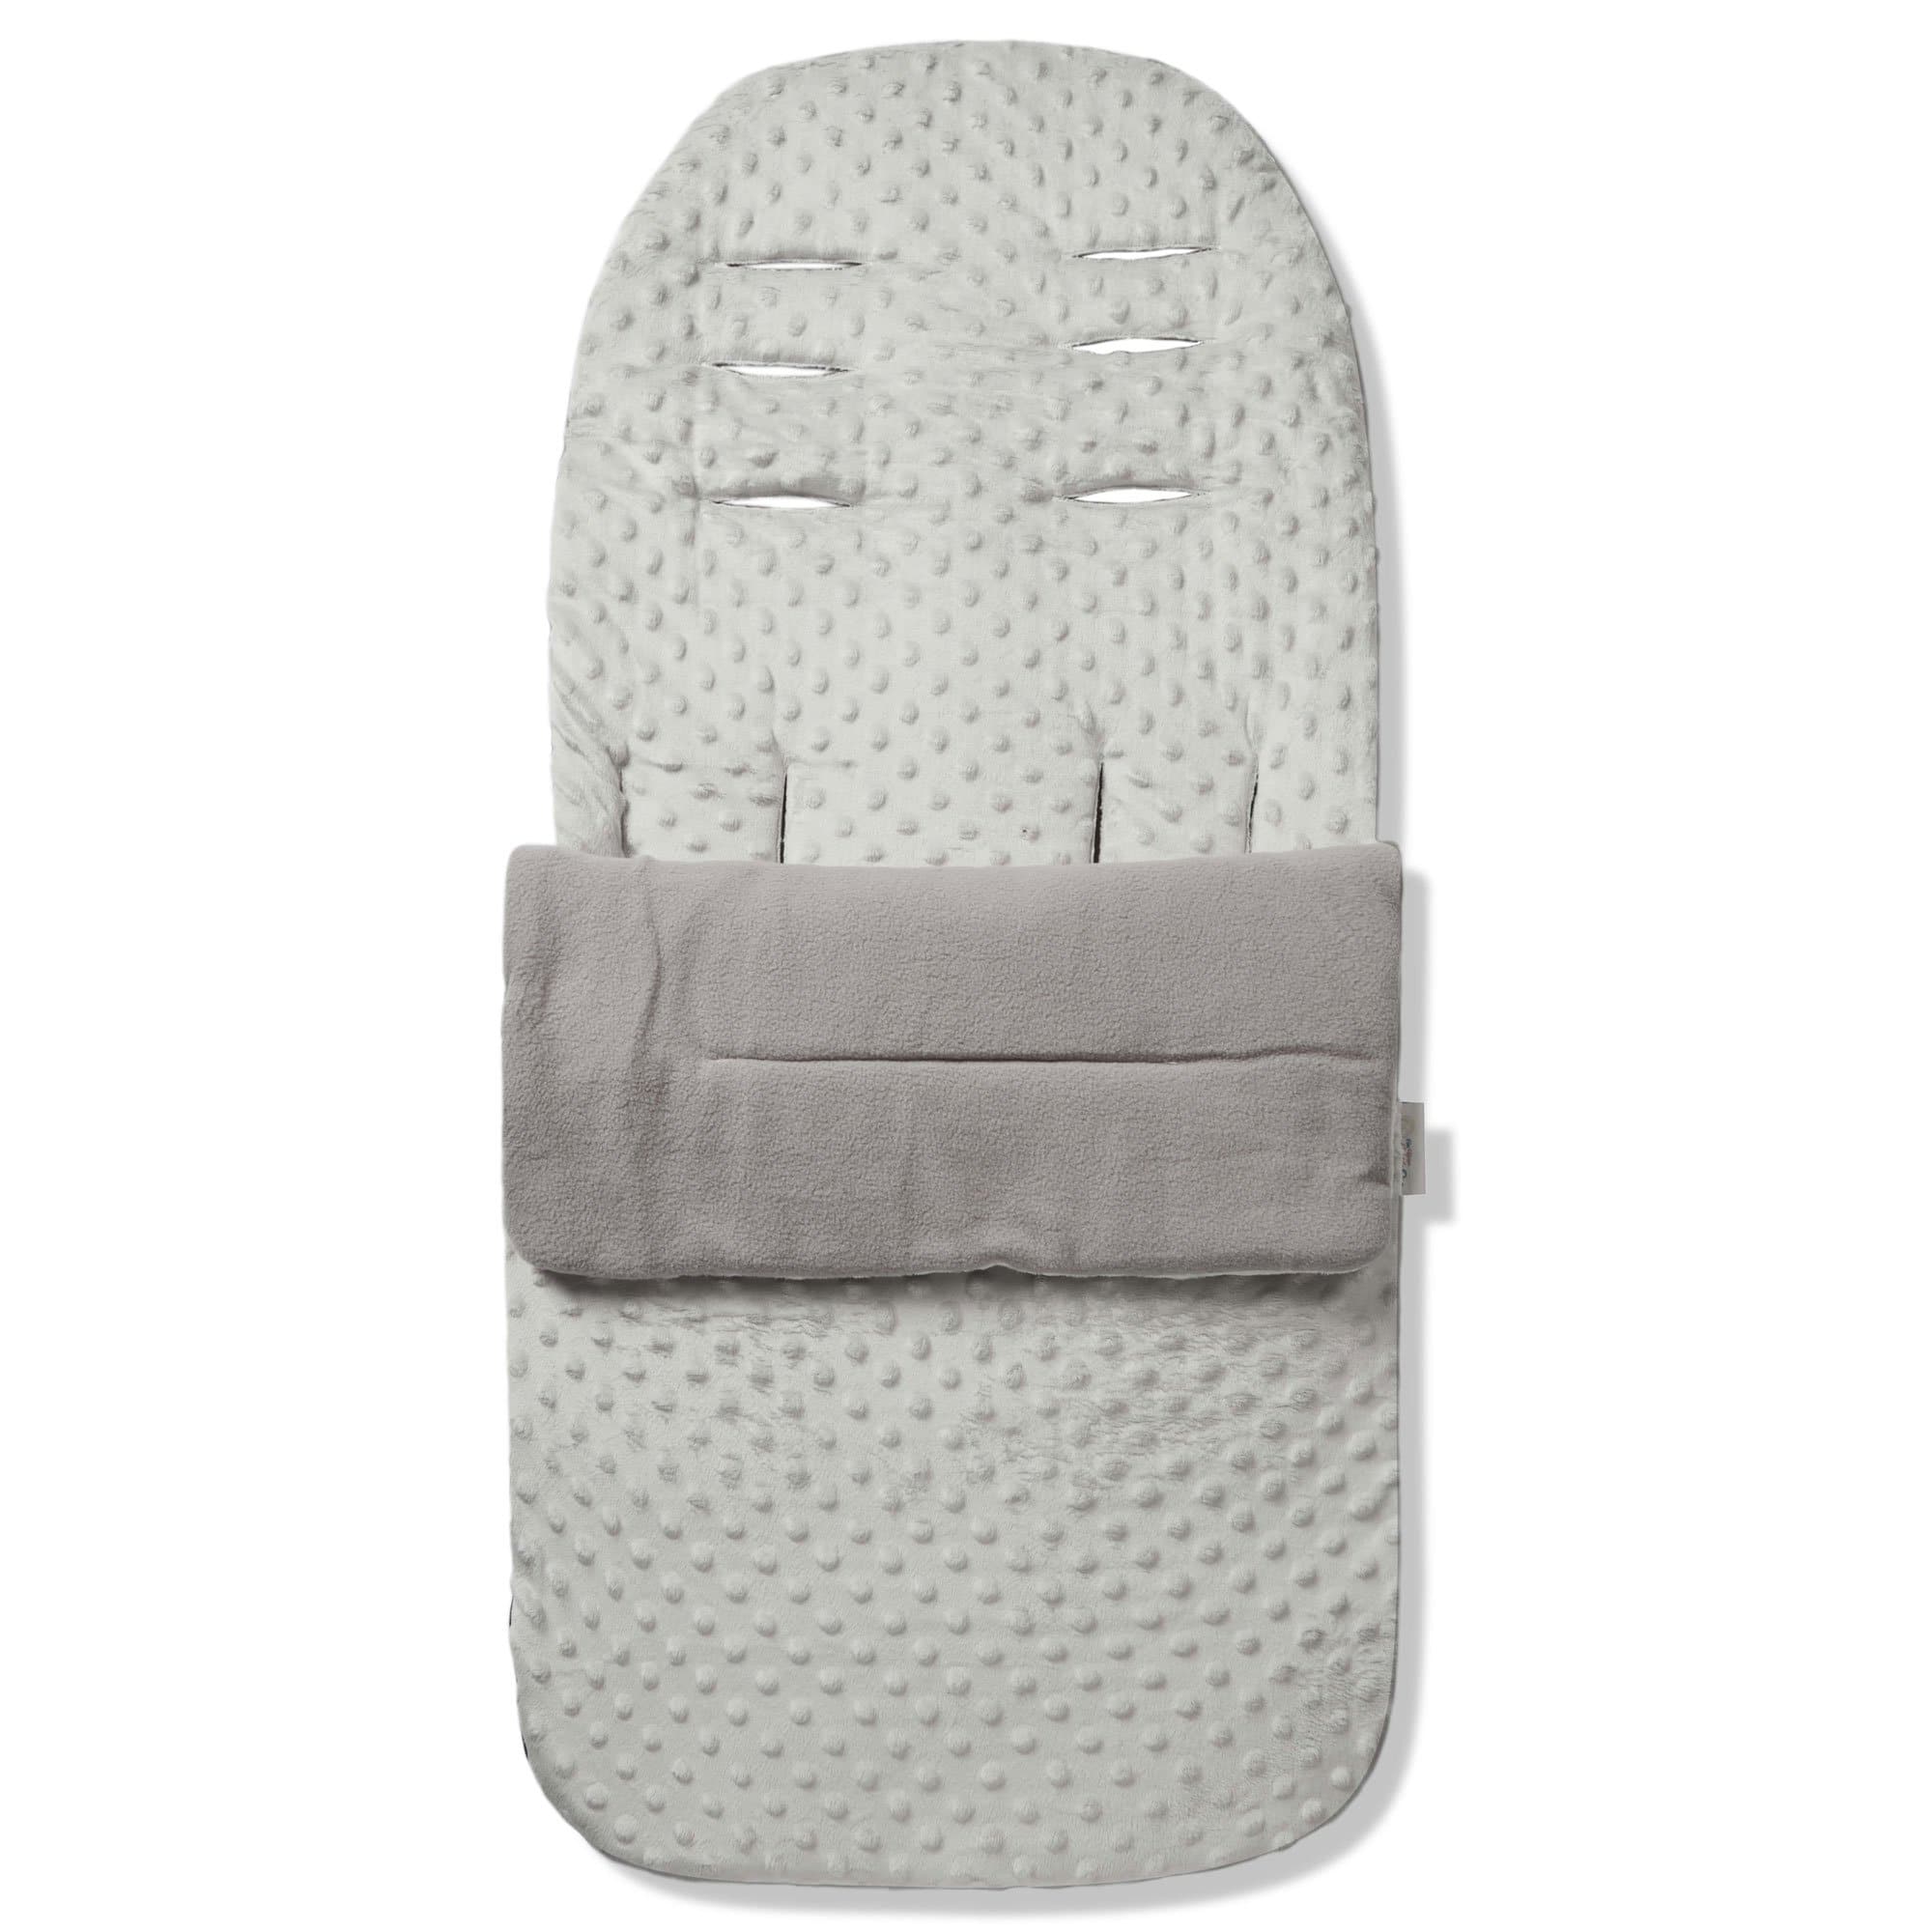 Dimple Footmuff / Cosy Toes Compatible with Hauck - Grey / Fits All Models | For Your Little One